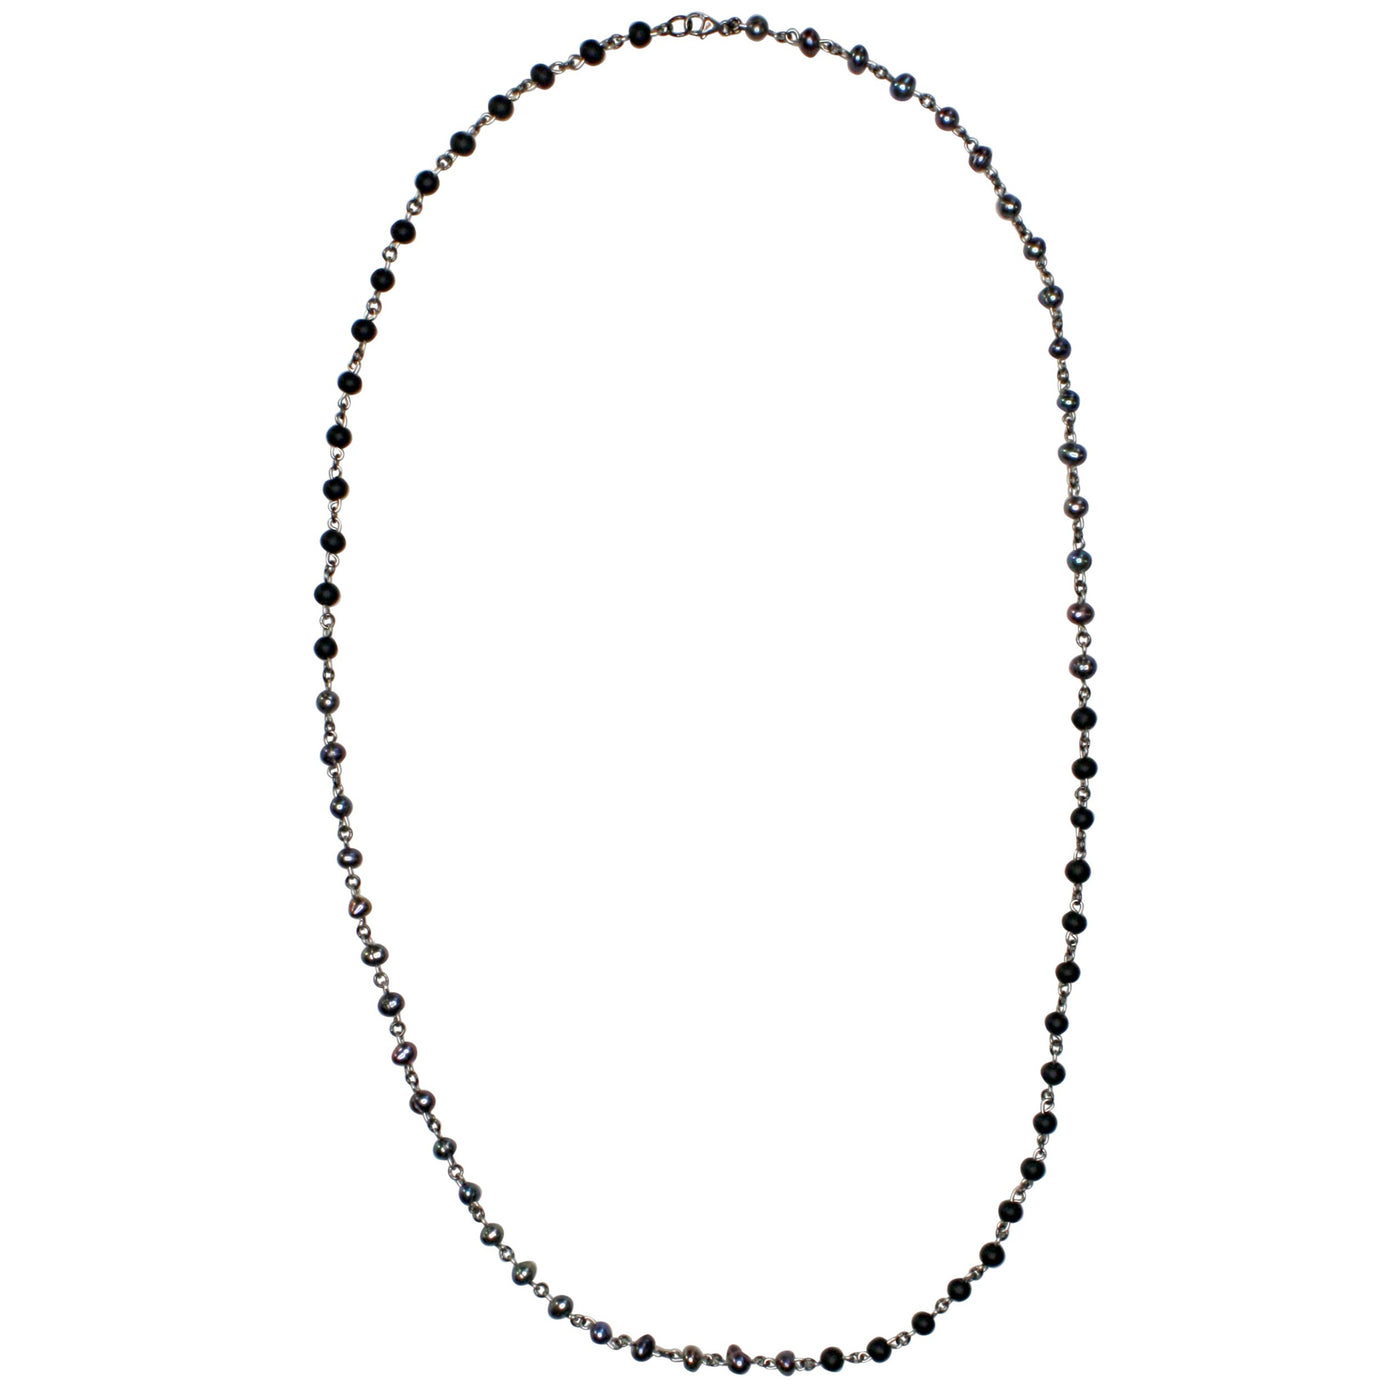 Linked Pearl/Onyx Necklace